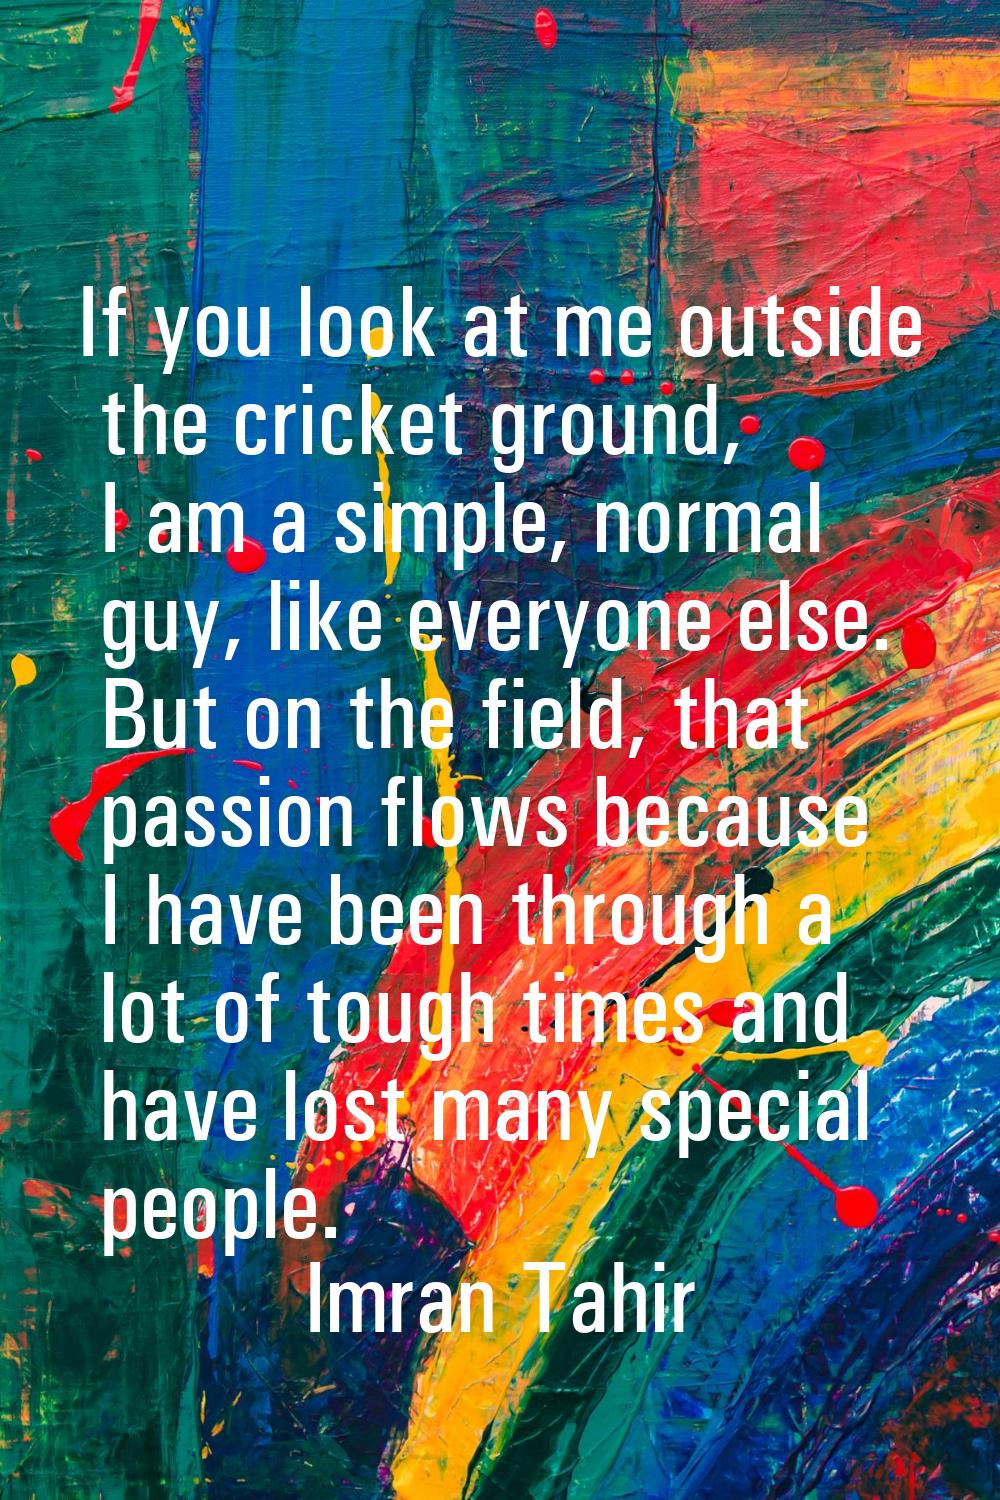 If you look at me outside the cricket ground, I am a simple, normal guy, like everyone else. But on